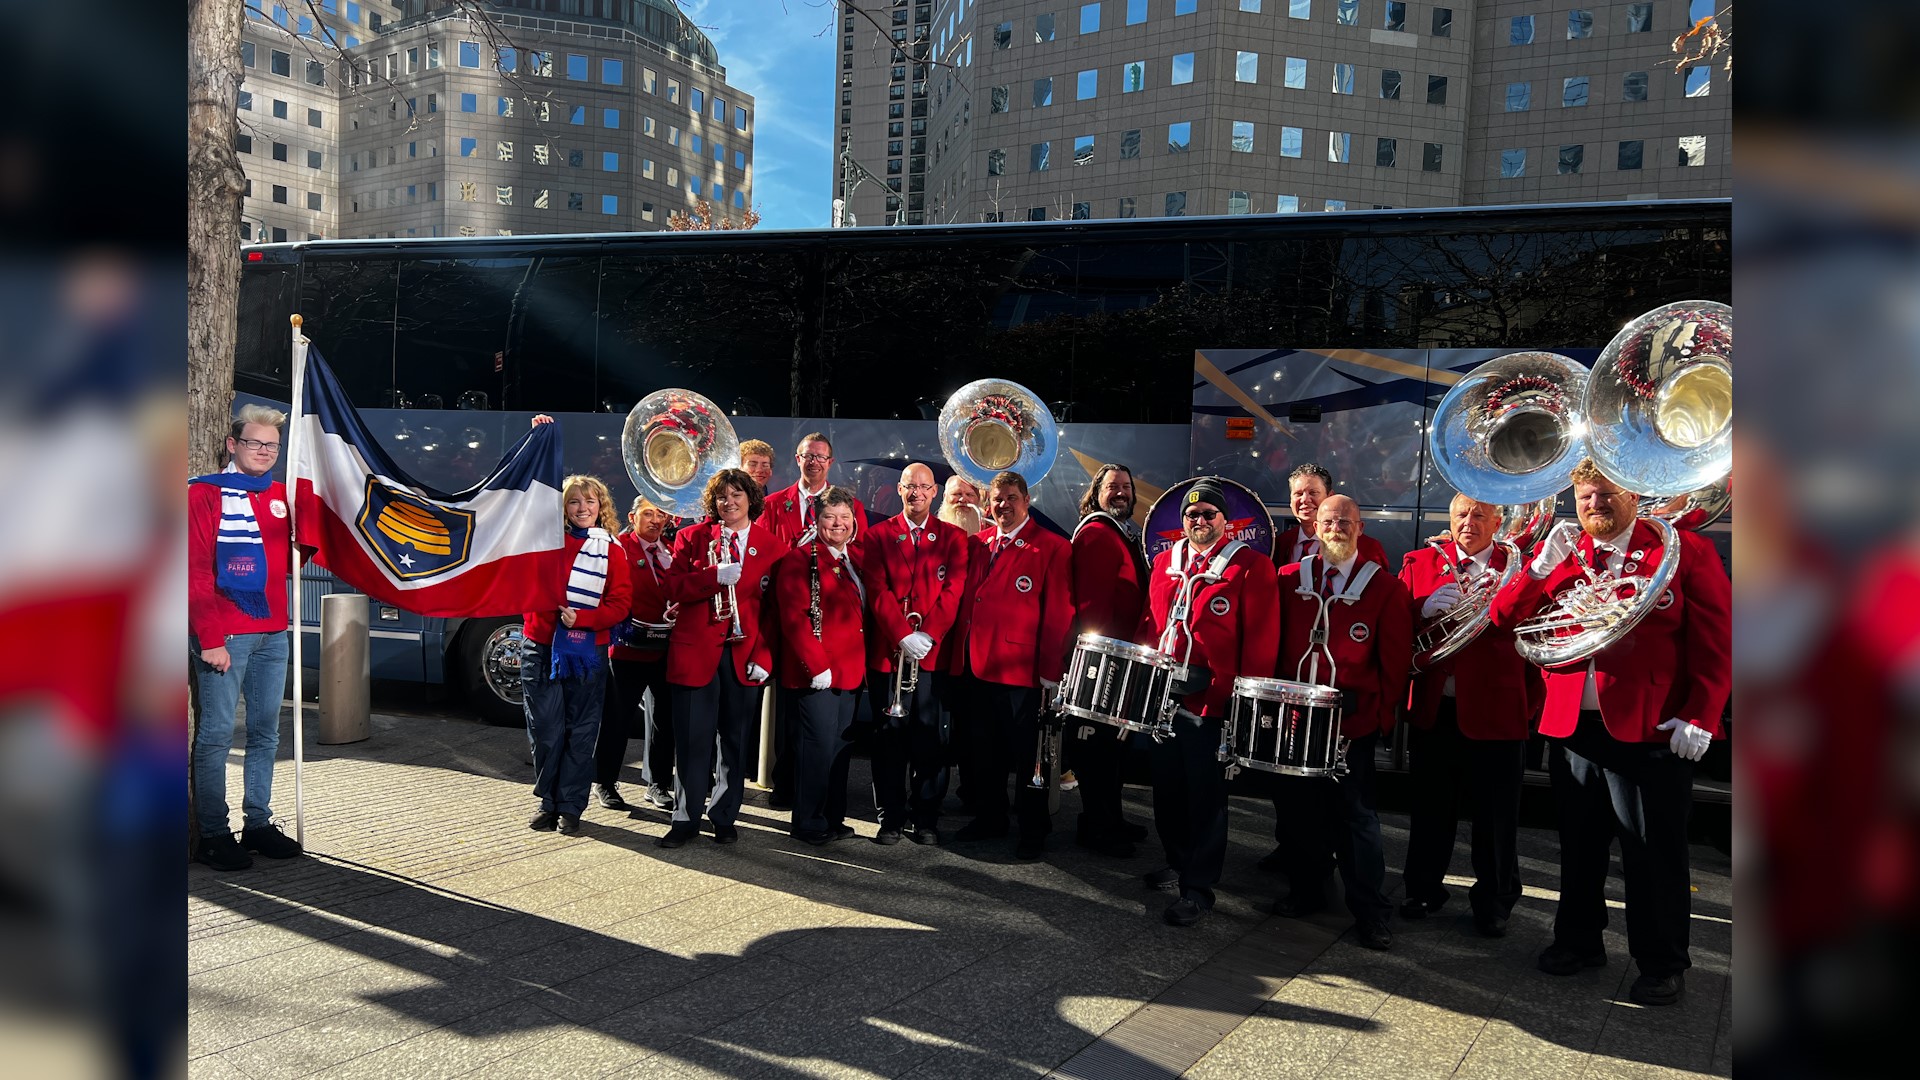 Thirteen band directors from Utah will participate in the Macy's Thanksgiving Day Parade on Thursda...